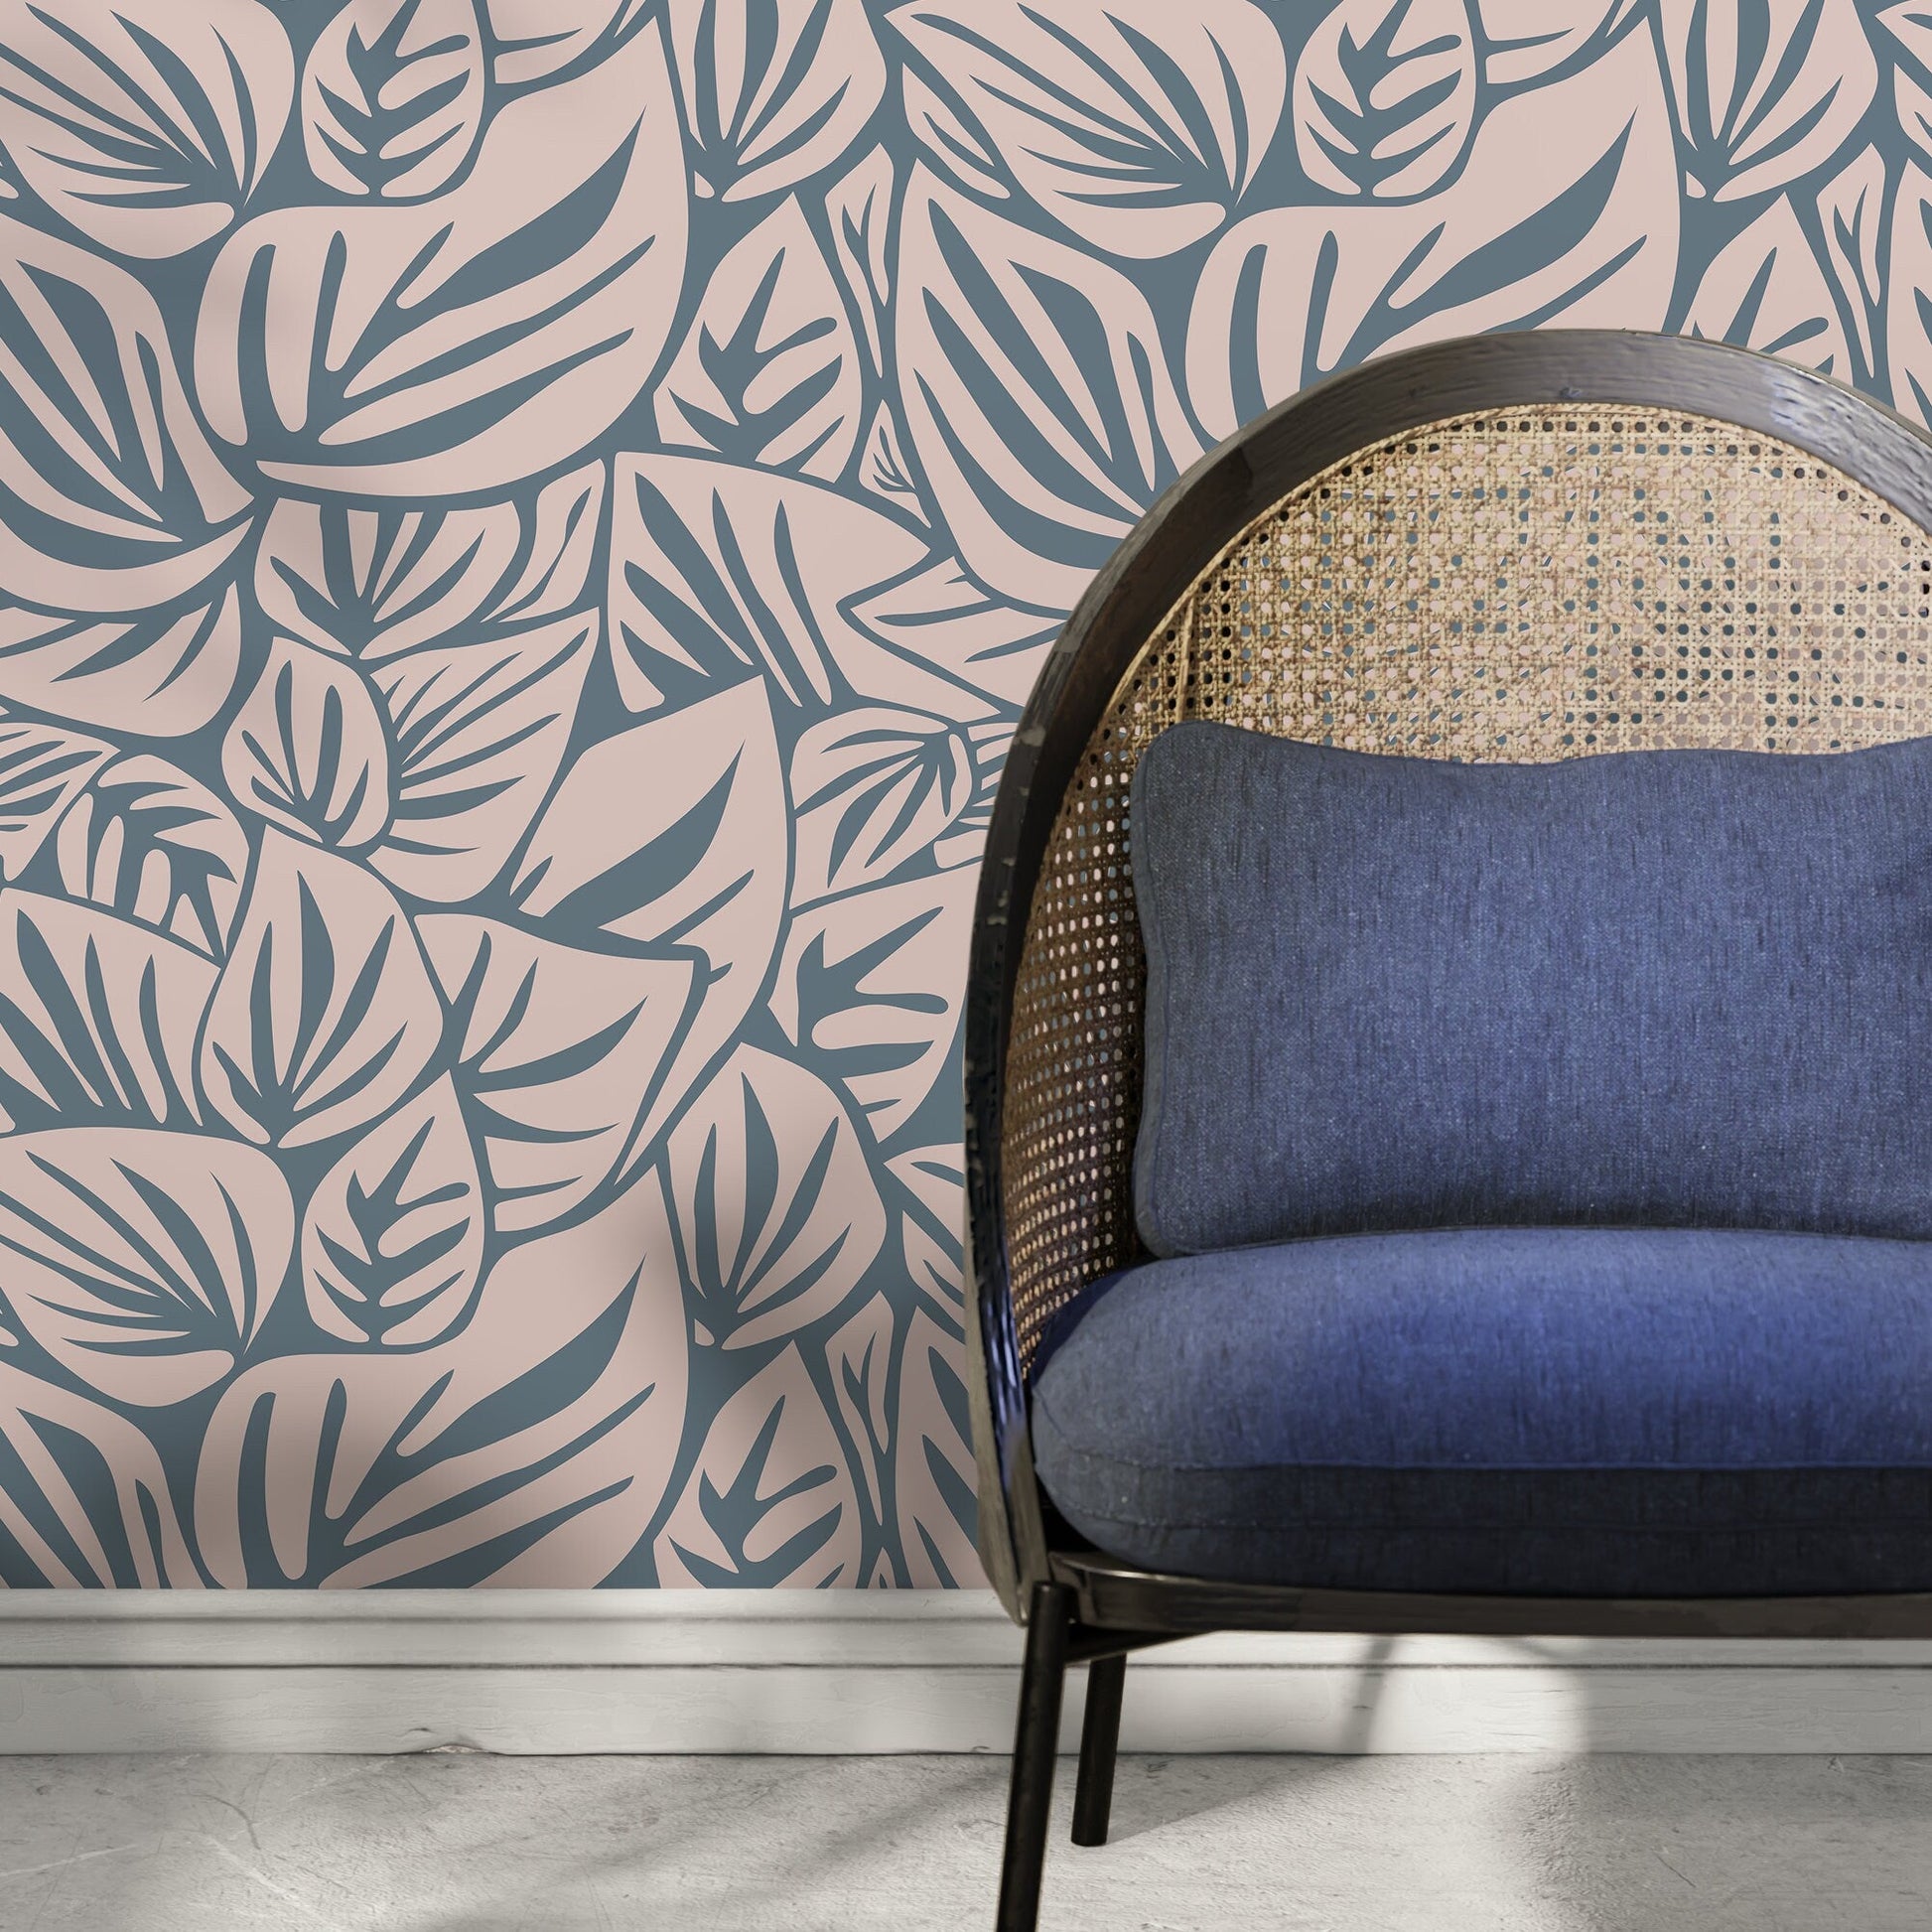 Blue and Beige Leaf Wallpaper Modern Wallpaper Peel and Stick and Traditional Wallpaper - D652